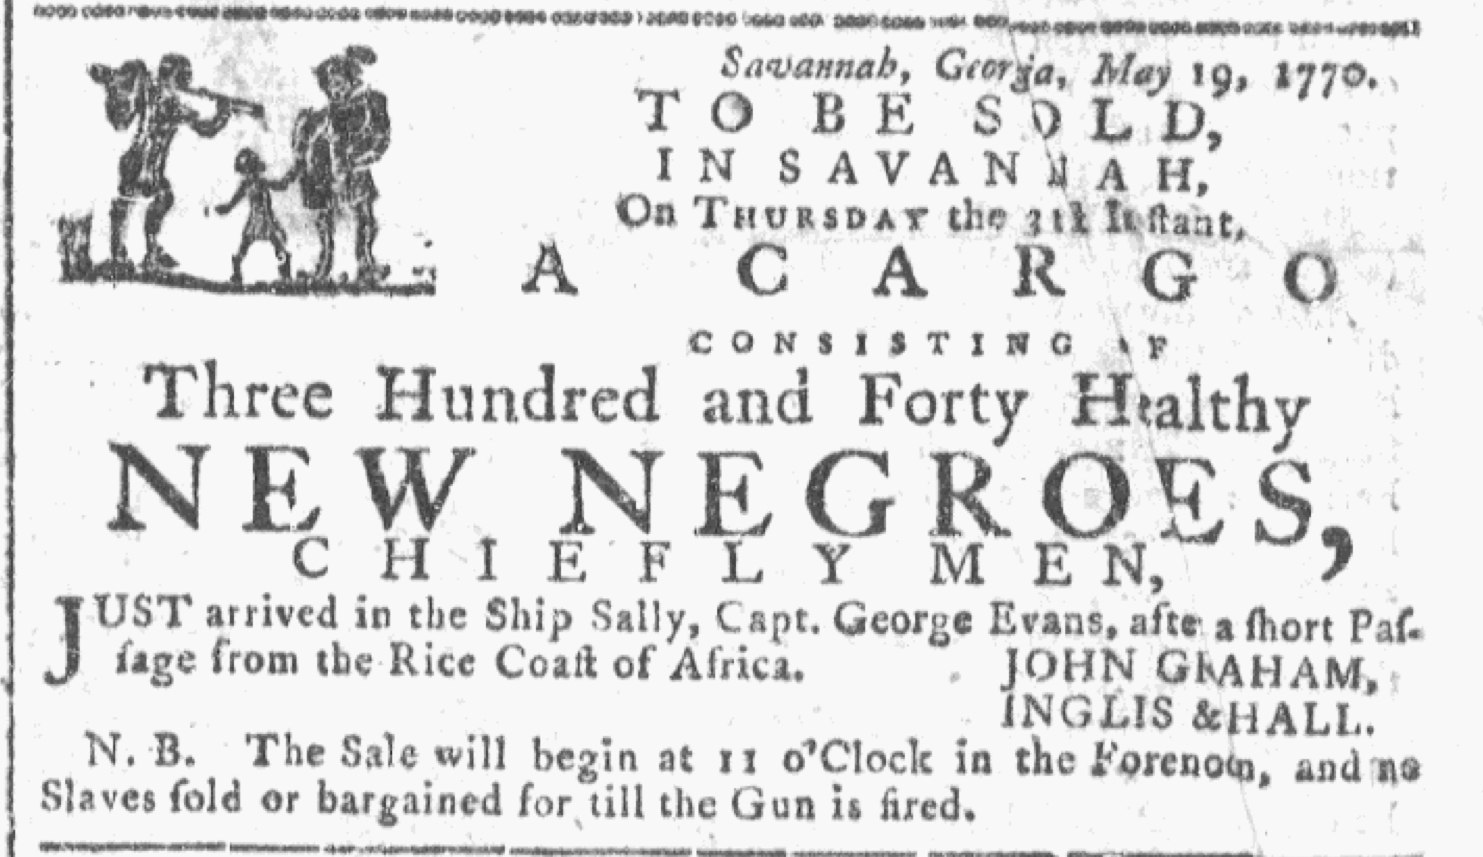 Slavery Advertisements Published May 23 1770 The Adverts 250 Project